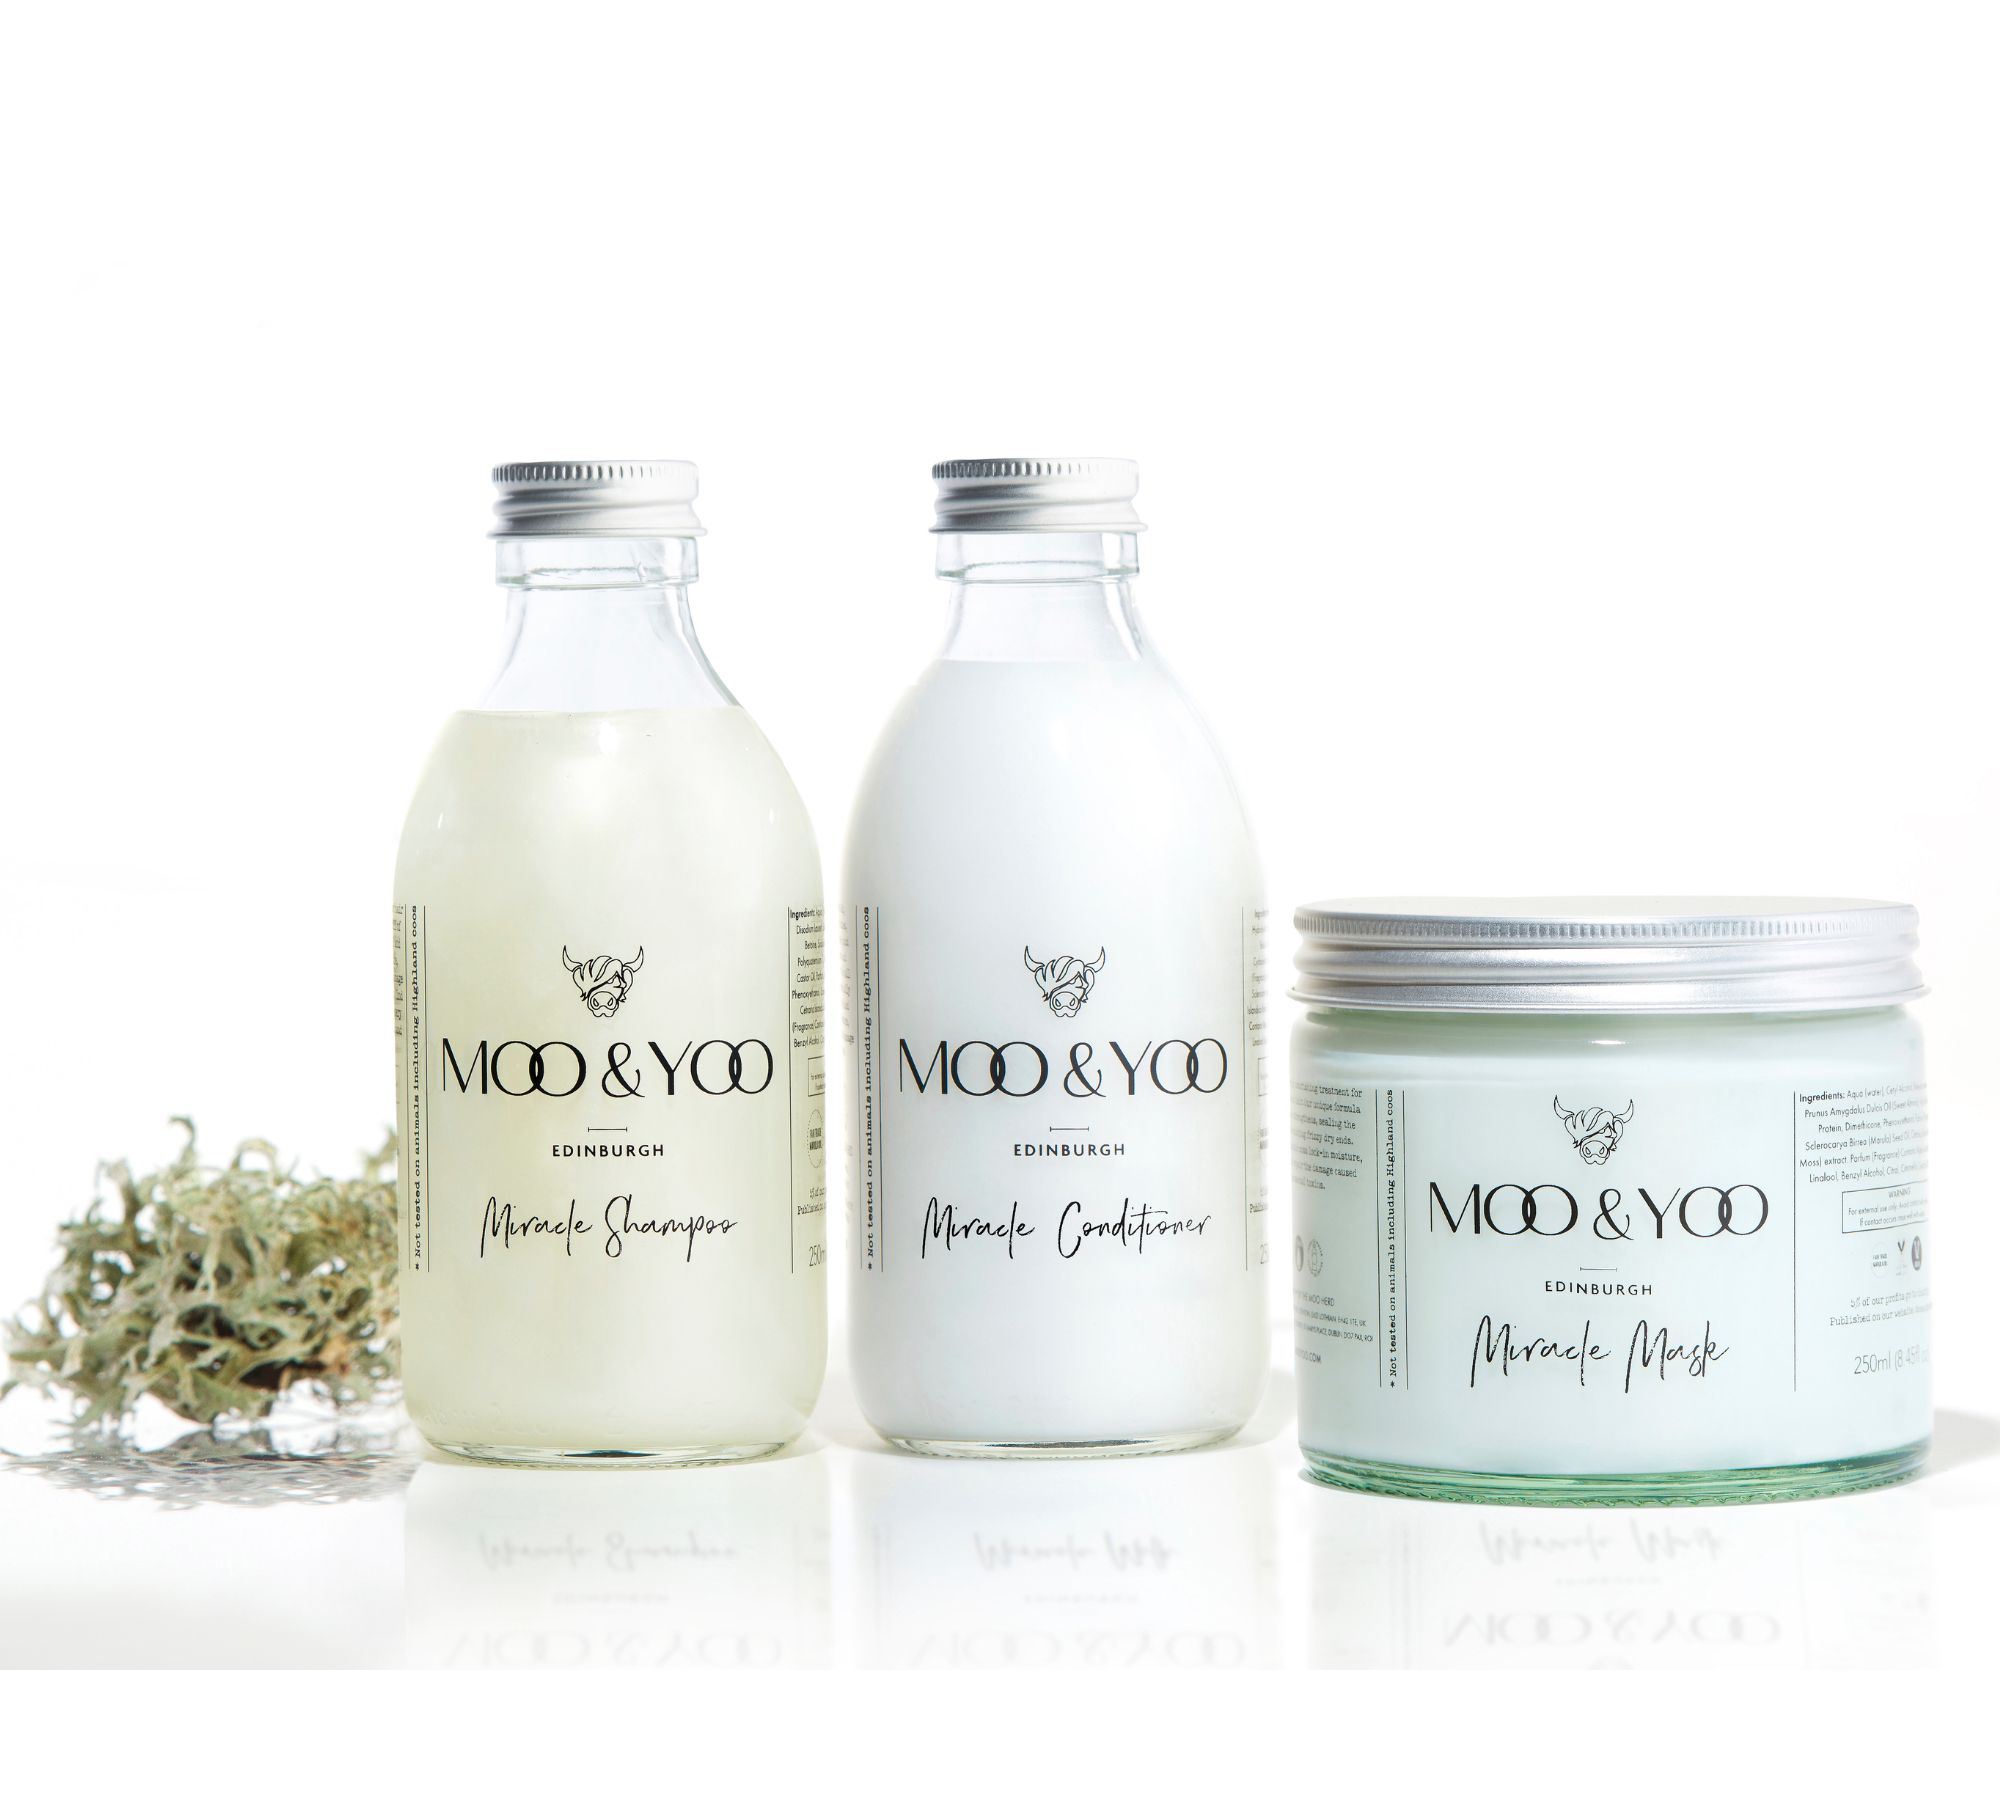 Two glass bottles and a glass jar of Moo and Yoo products sitting side by side. It is a Miracle Shampoo, Conditioner and a Miracle mask. They all have aluminium lids.  They are on a white background with a sprig of Icelandic moss placed to one side.